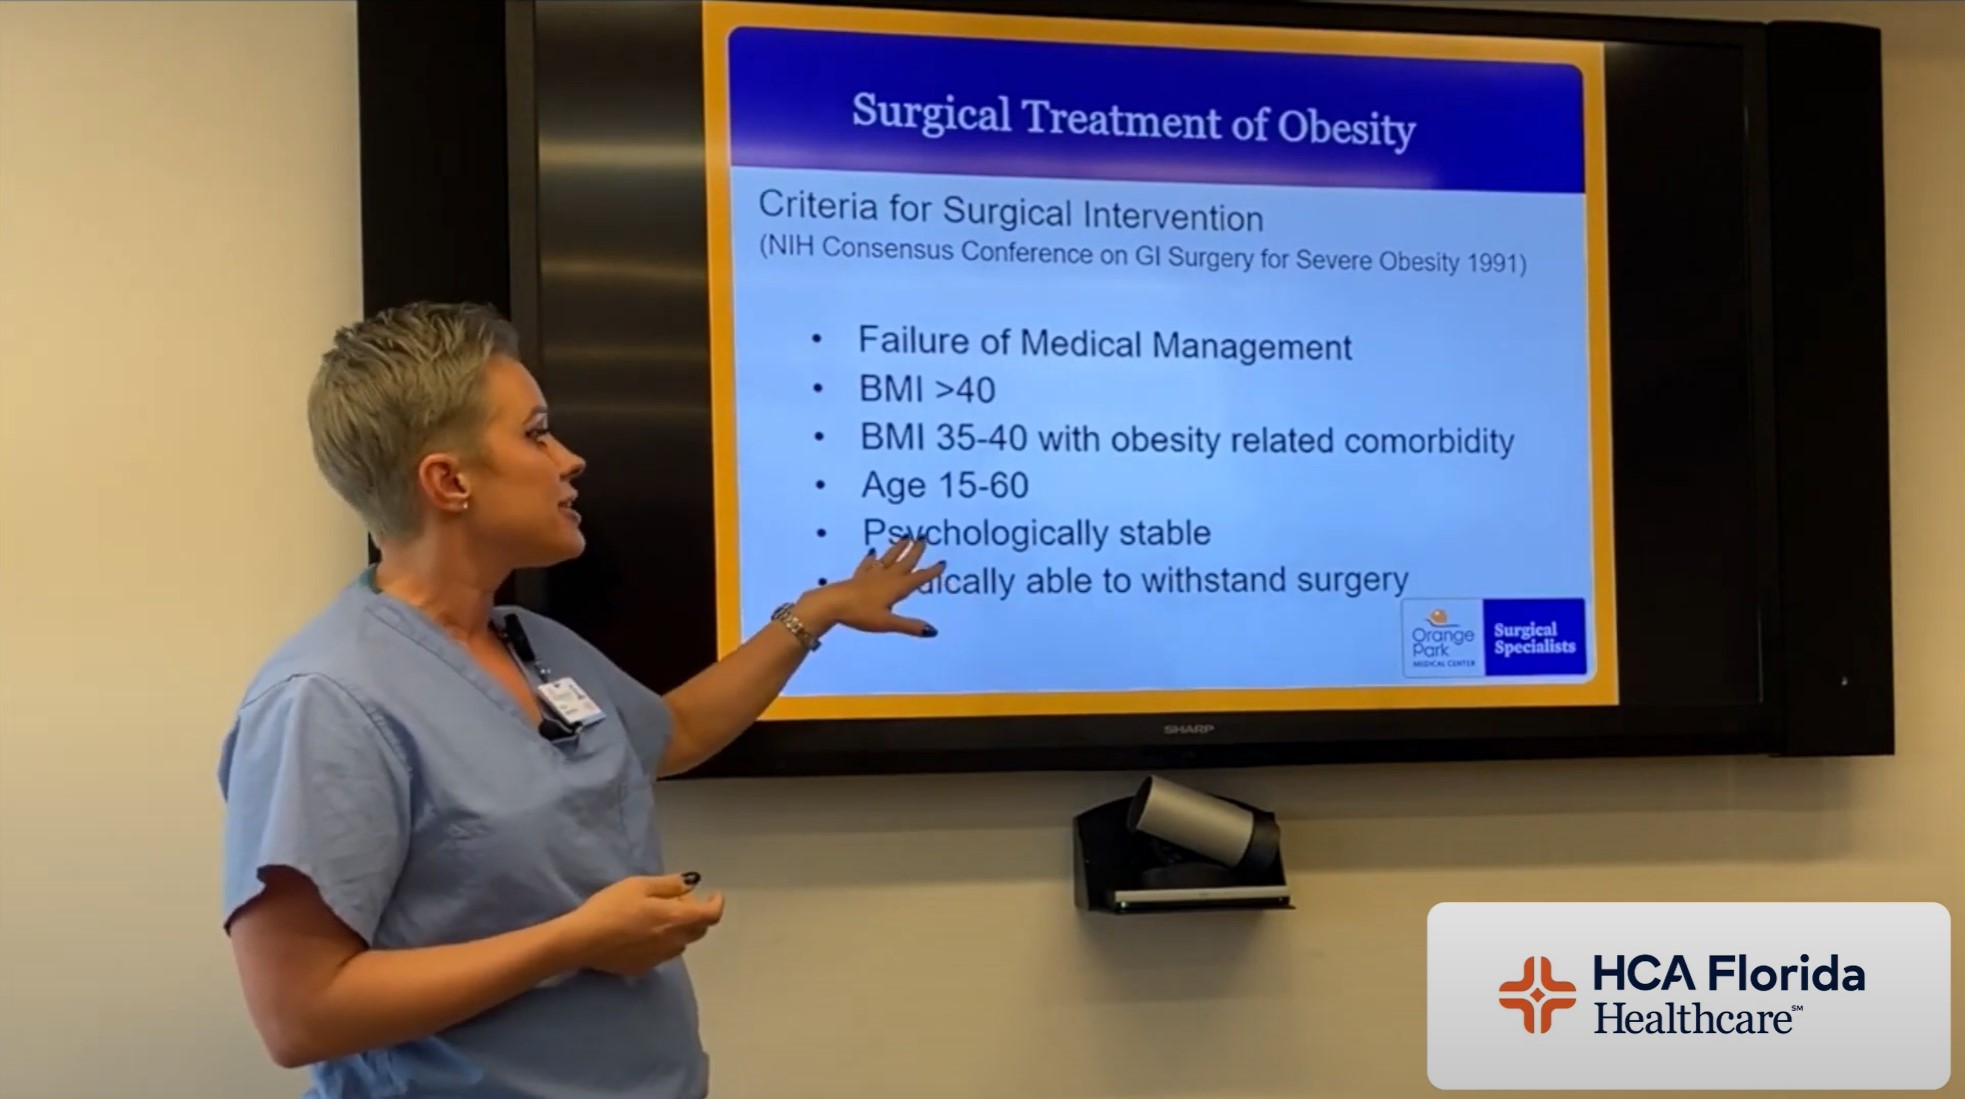 Physician presents information on a screen about weight-loss surgery at HCA Florida Orange Park Hospital.